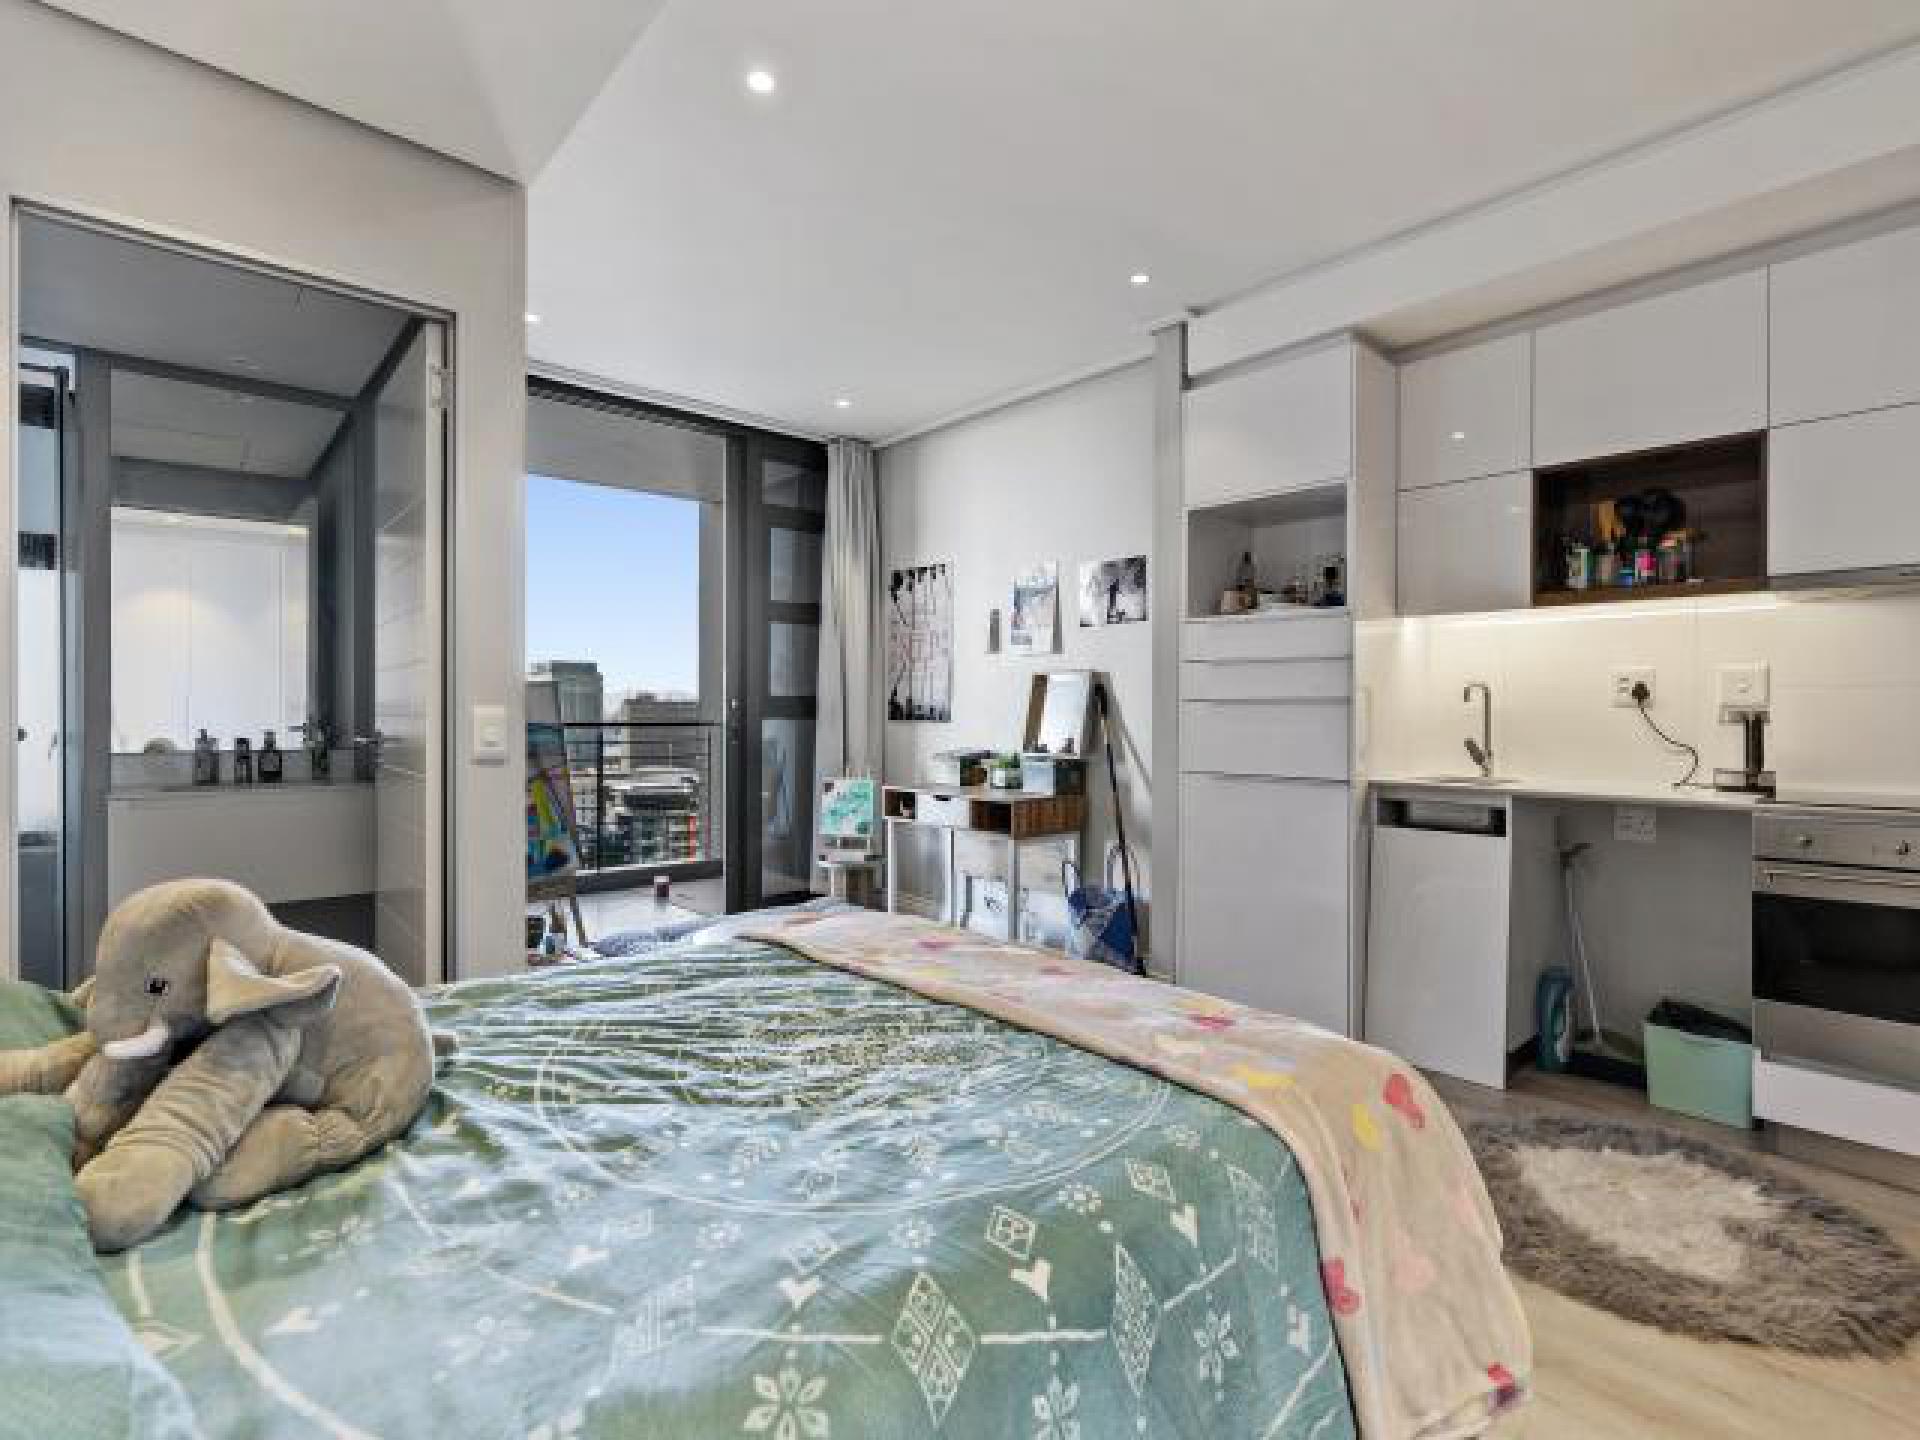 Main Bedroom of property in Cape Town Centre